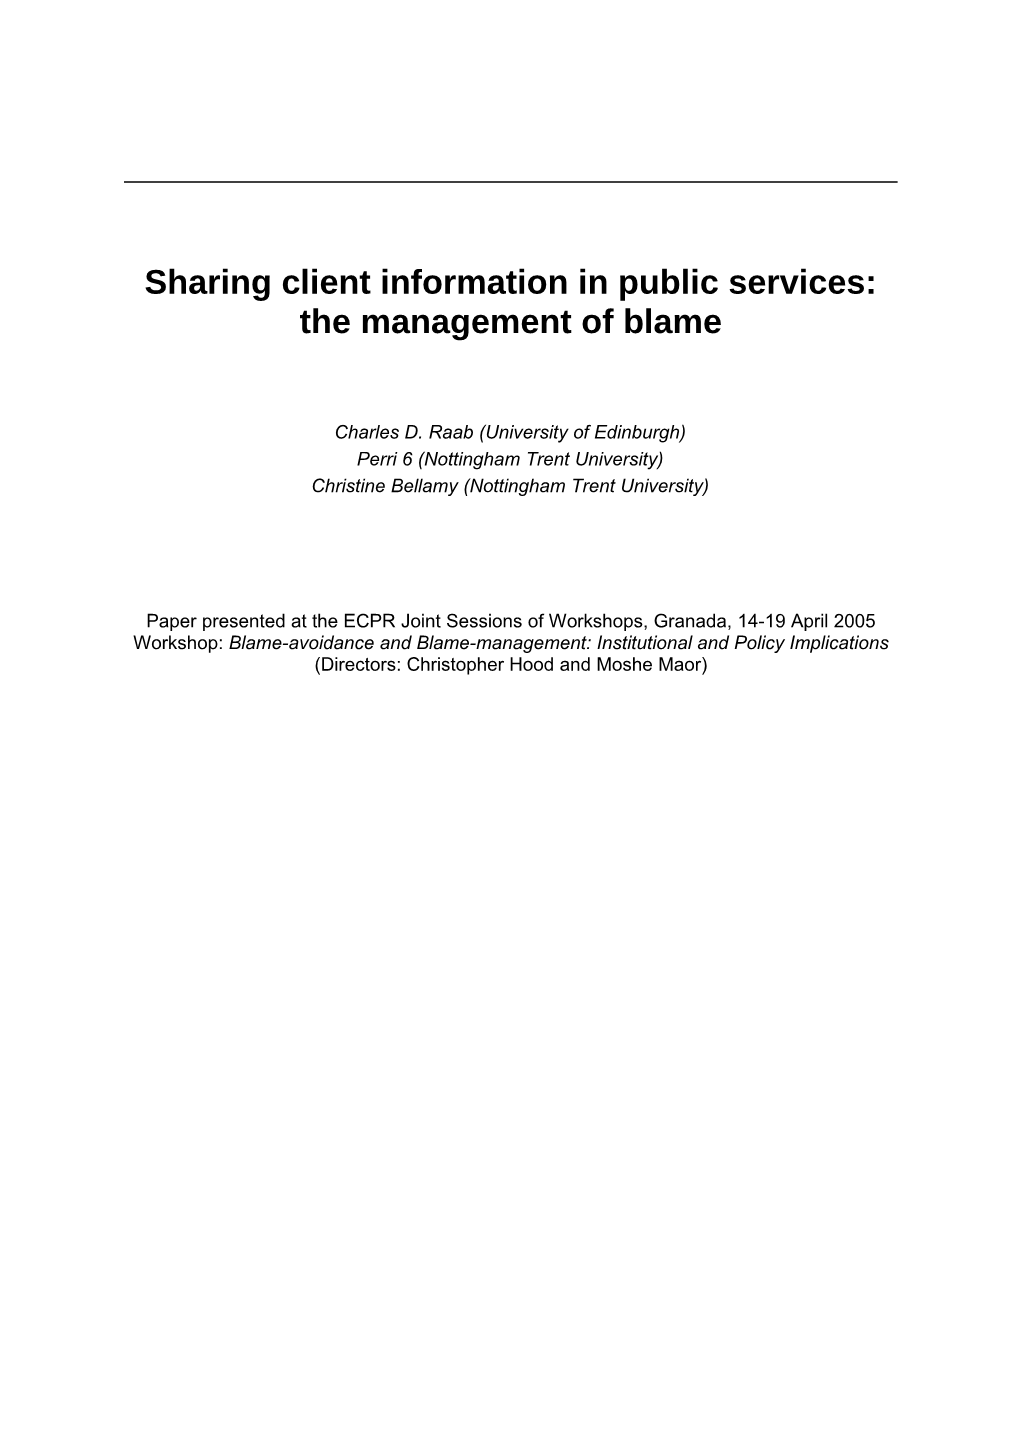 Sharing Client Information in Public Services